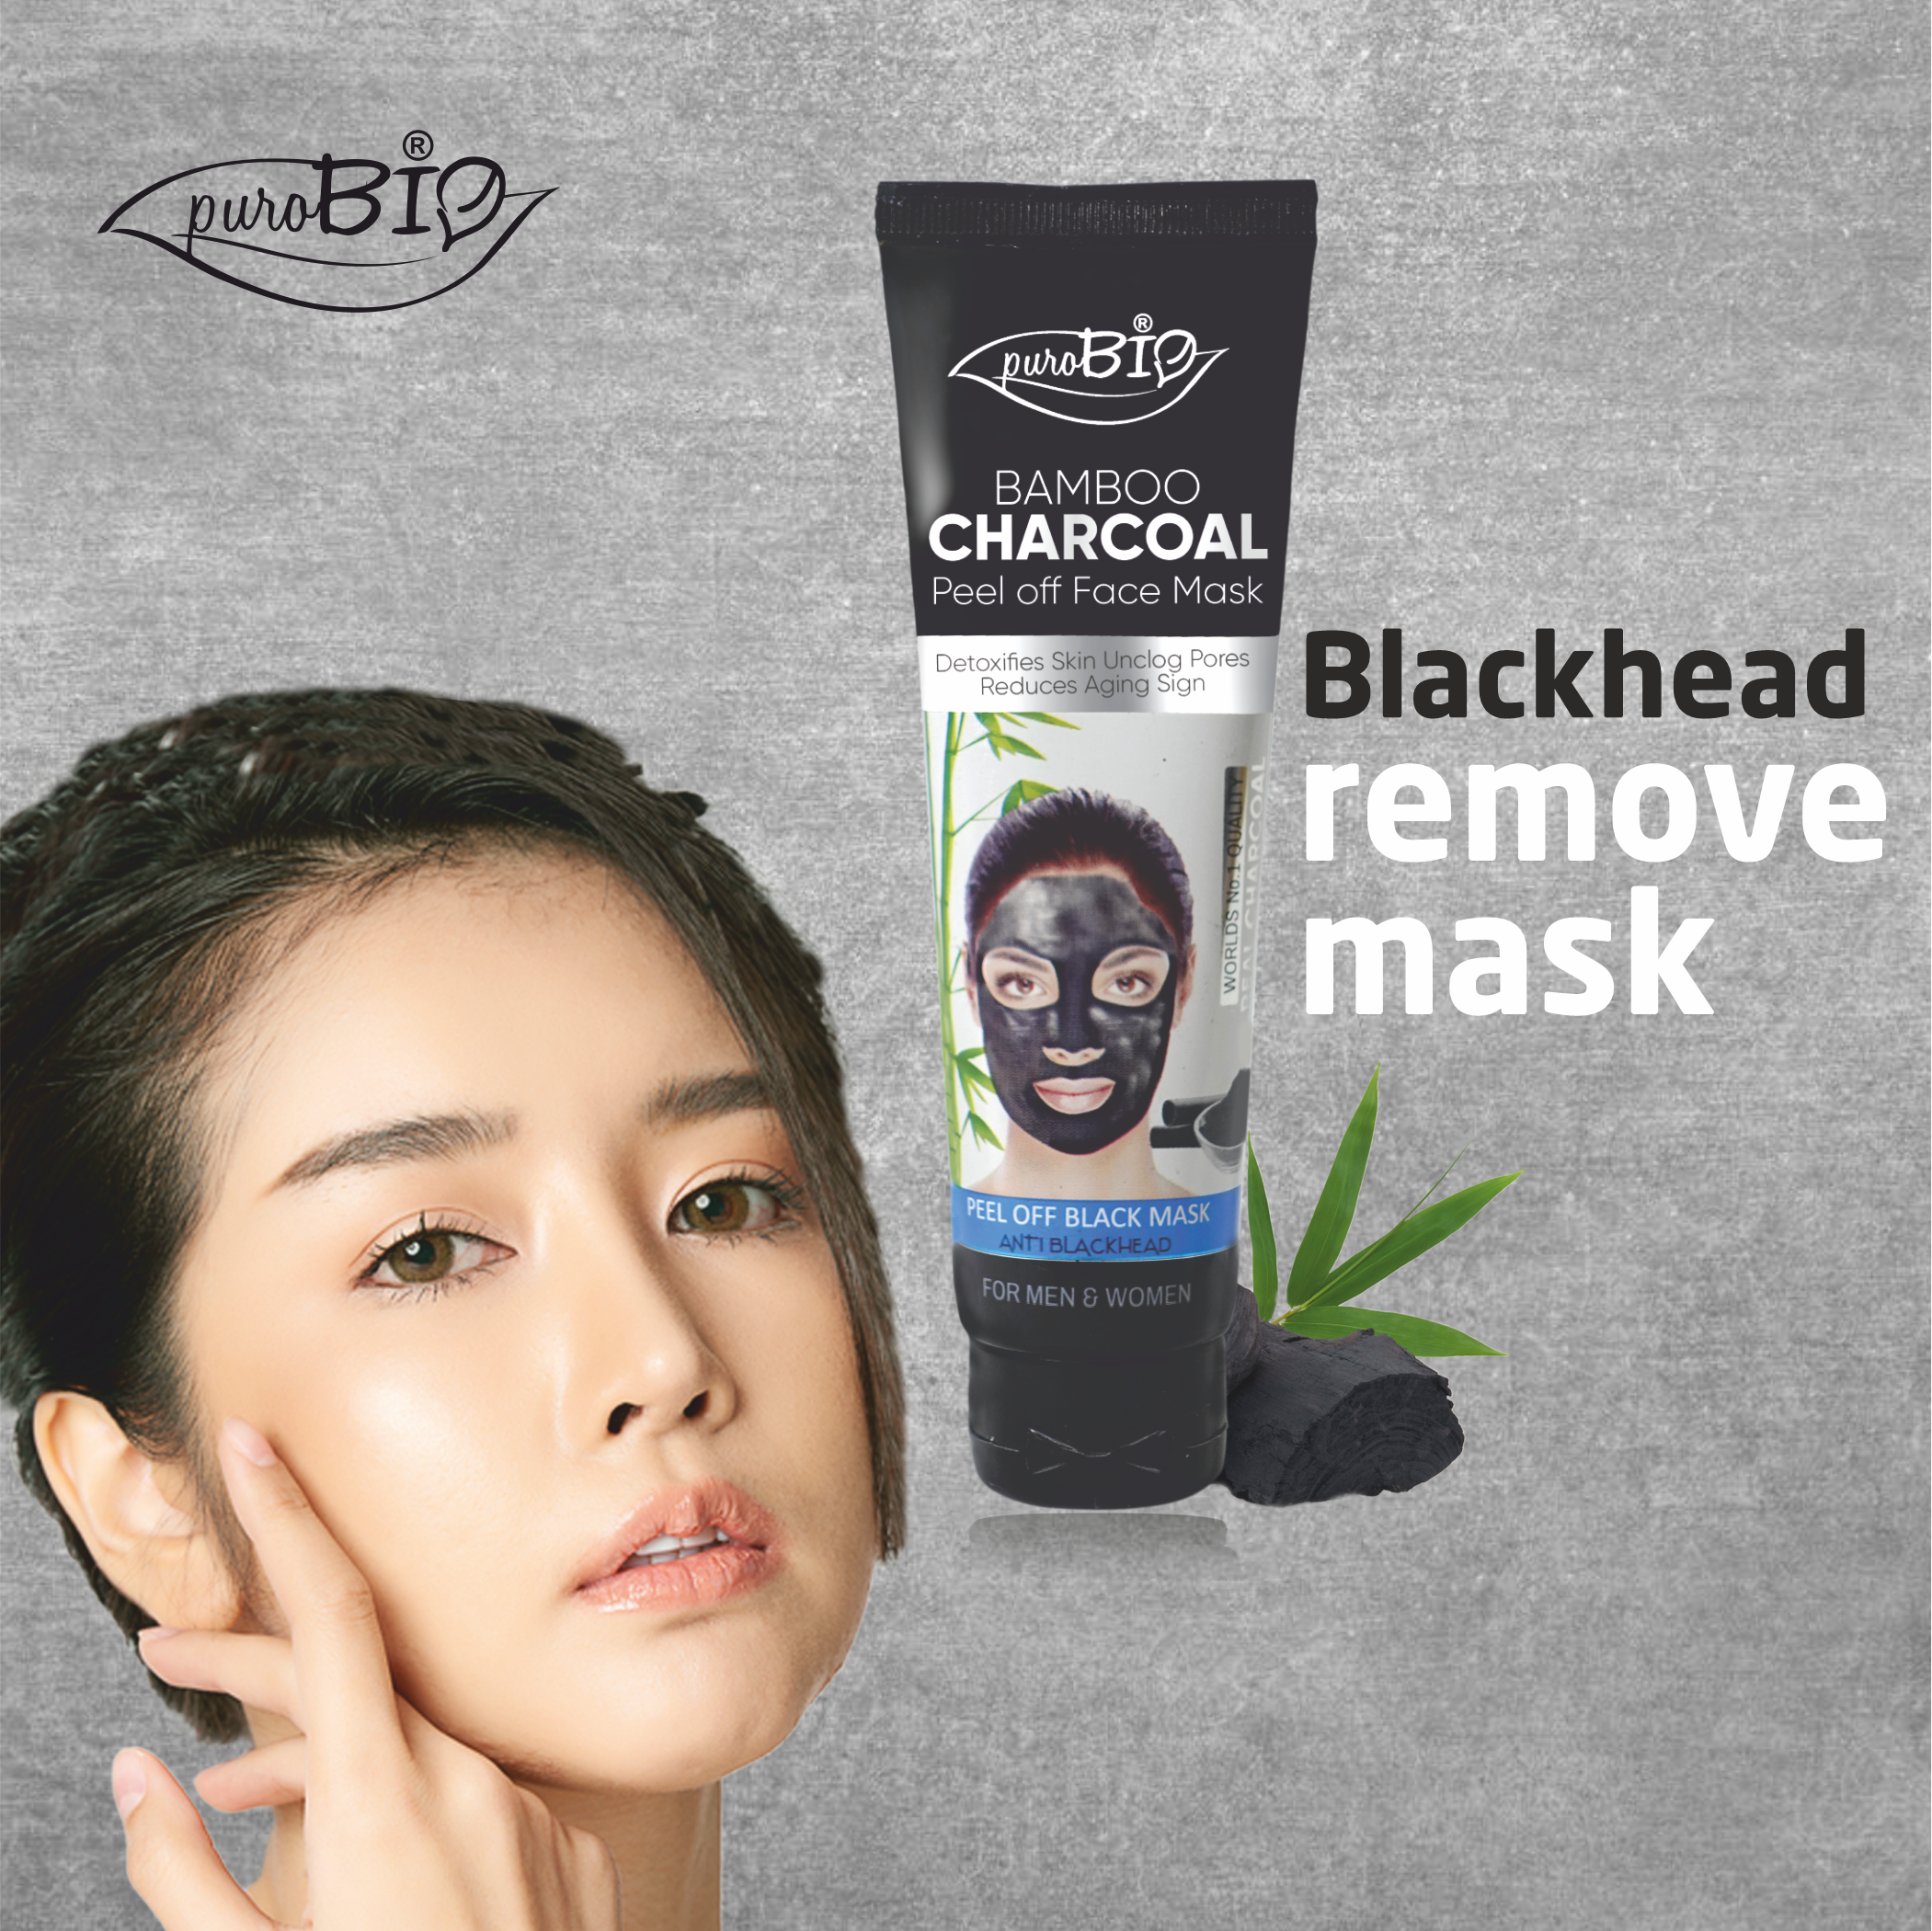 Bamboo Charcoal Peel Off Face Mask